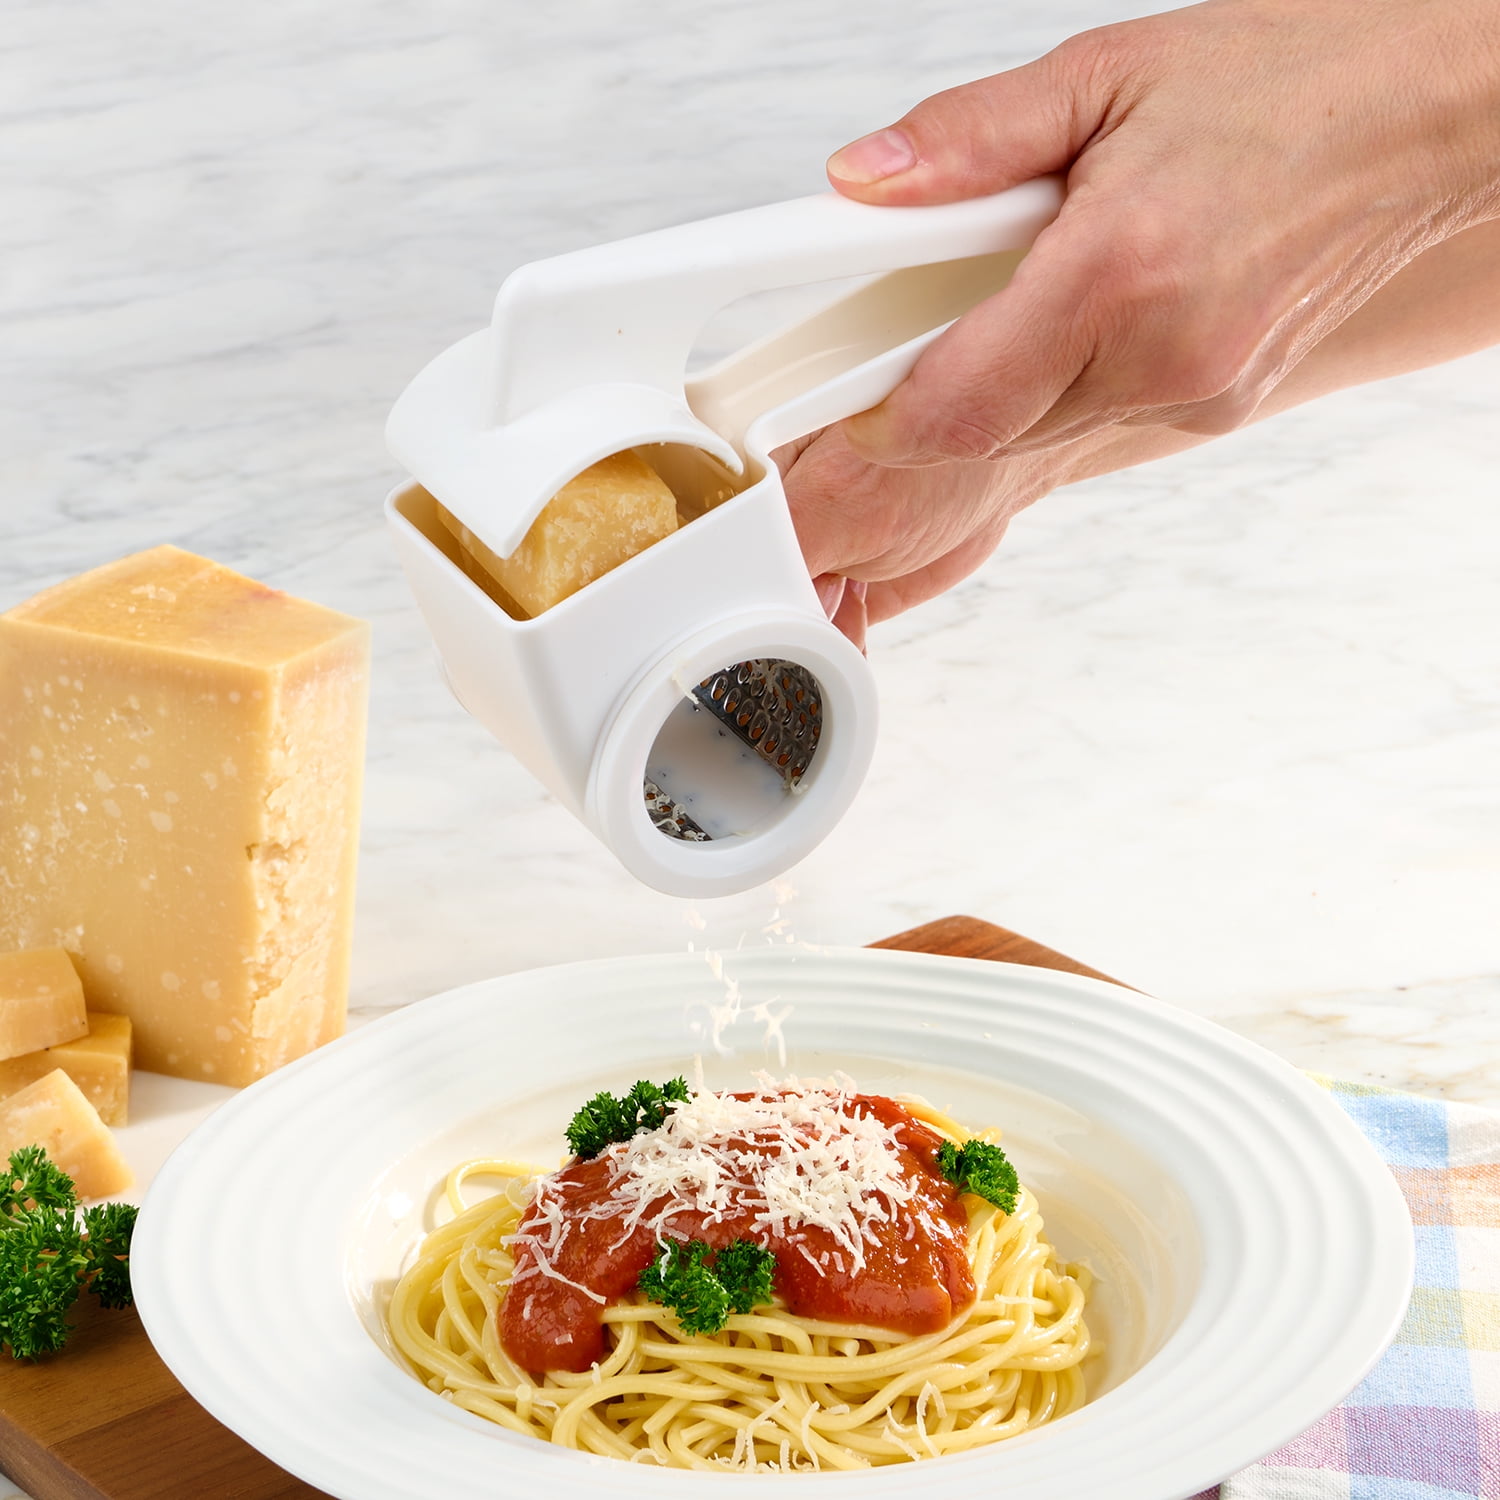 Mainstays Rotary Cheese Grater with Removable Stainless Steel